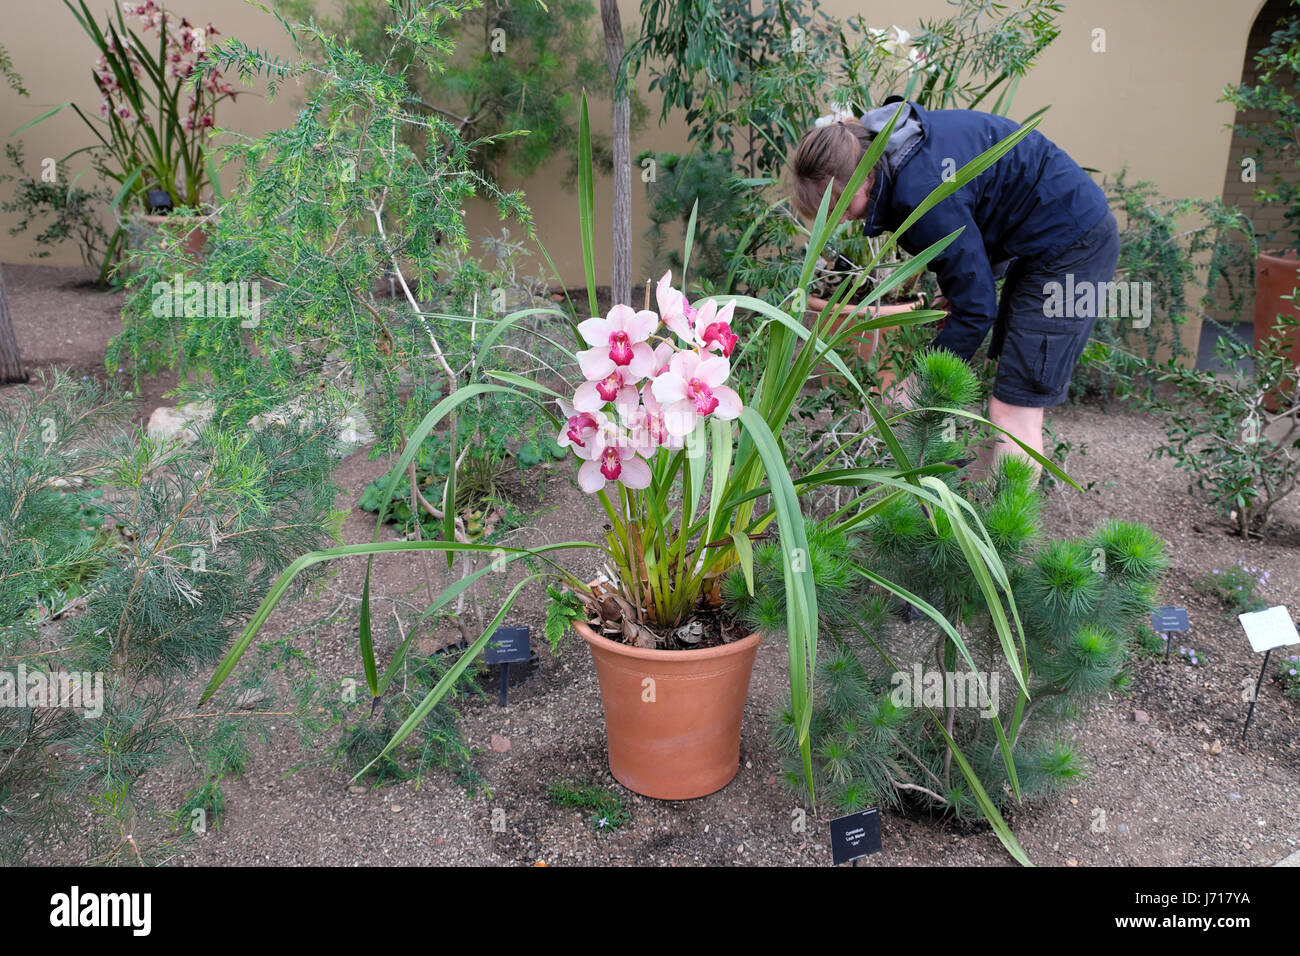 A gardener at Kew Gardens tending plants by a pink Vanda orchid growing in a terra cotta pot in Princess of Wales Conservatory, London UK KATHY DEWITT Stock Photo